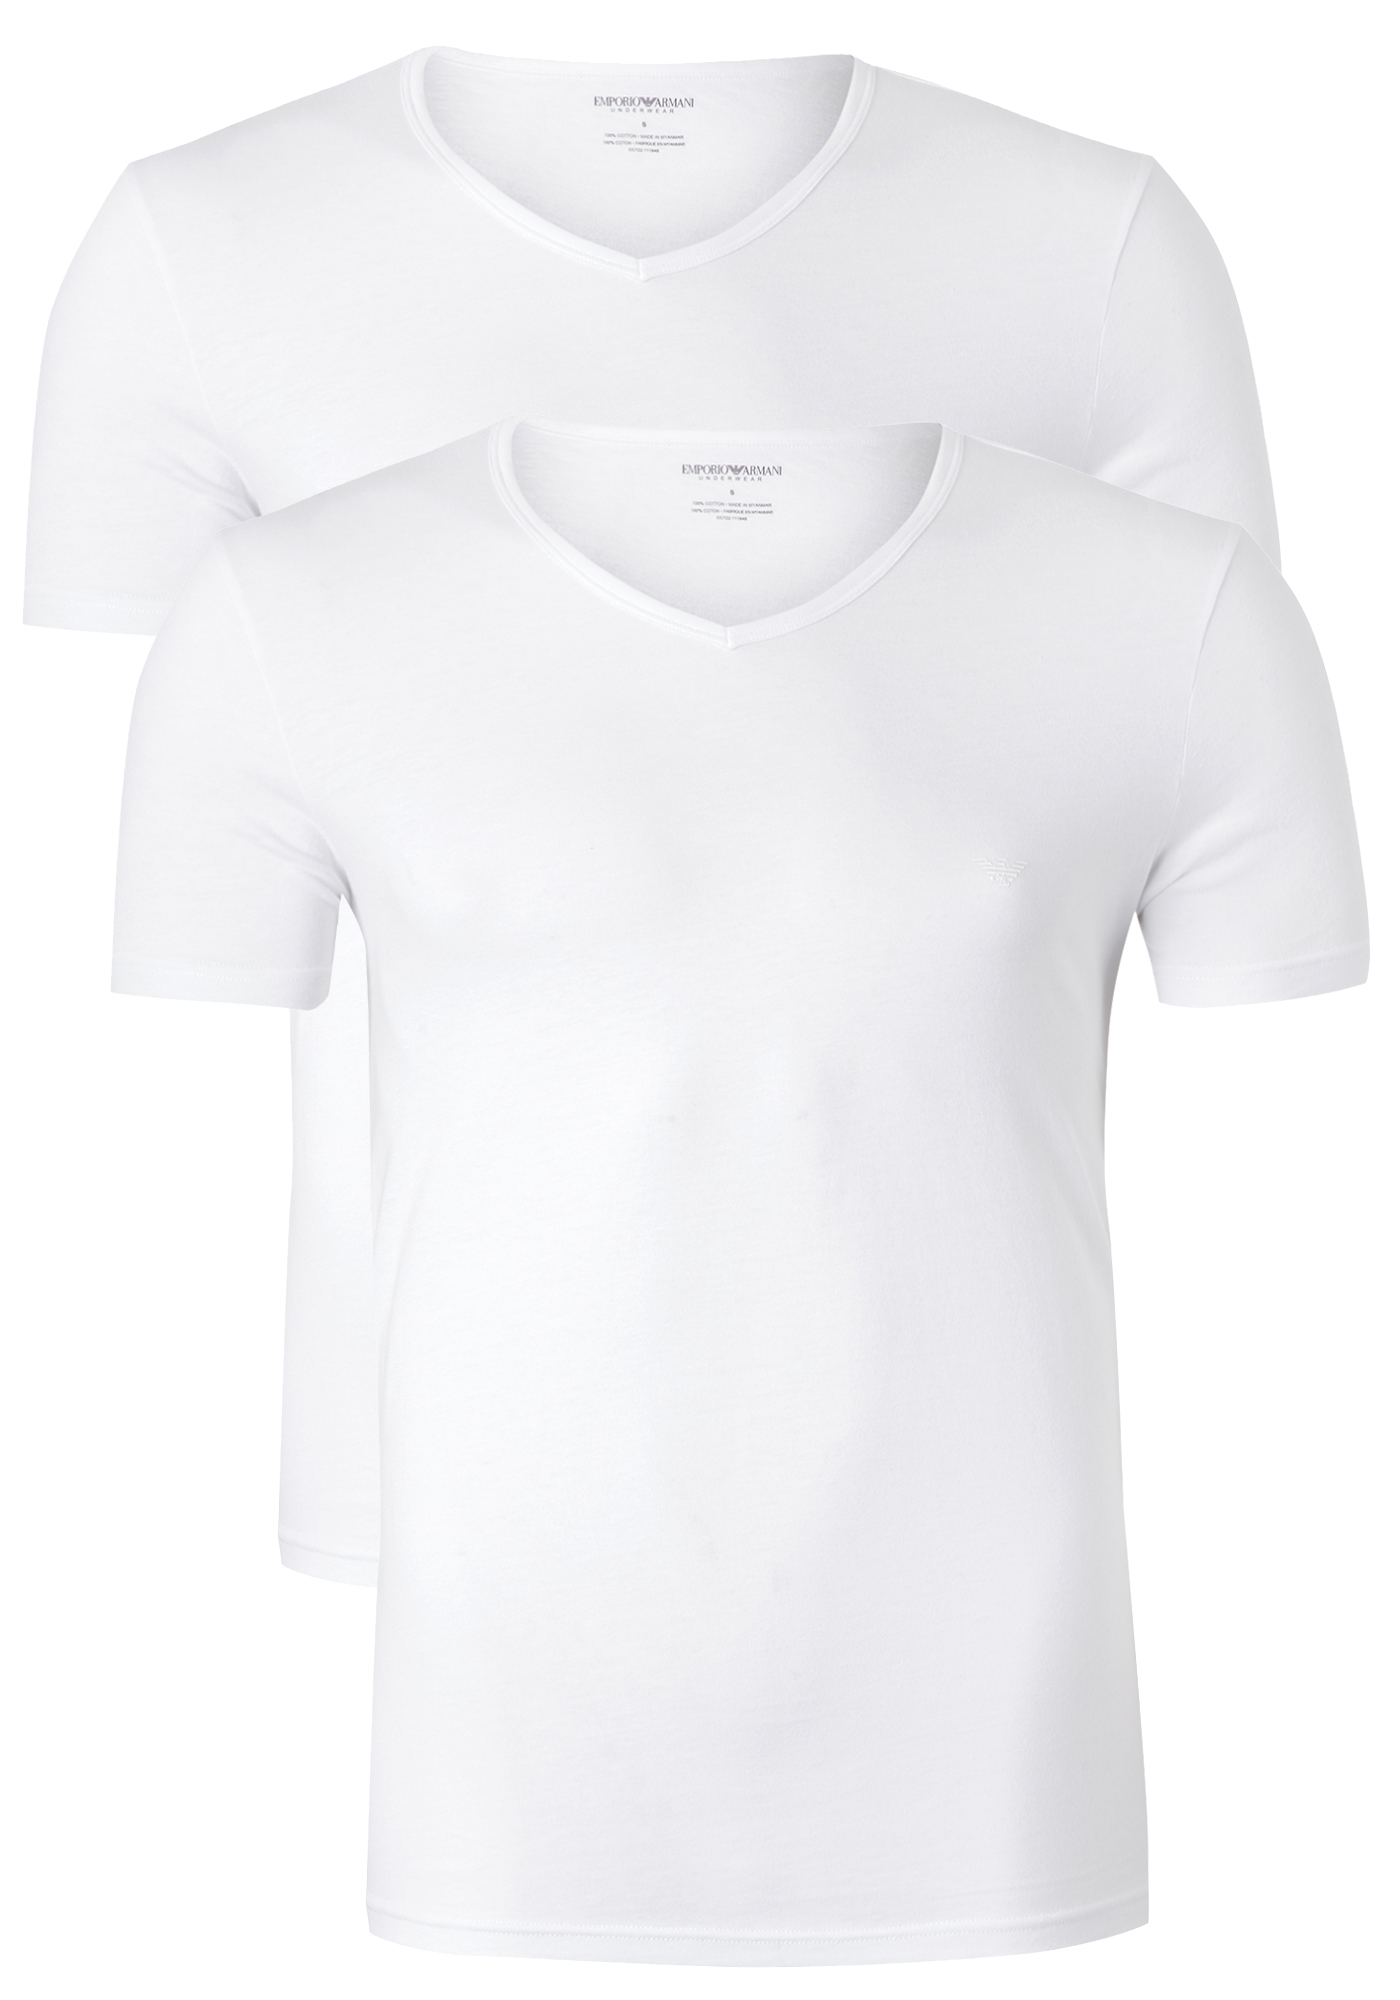 Emporio Armani T-shirts Pure Cotton (2-pack), heren T-shirts V-hals, wit   